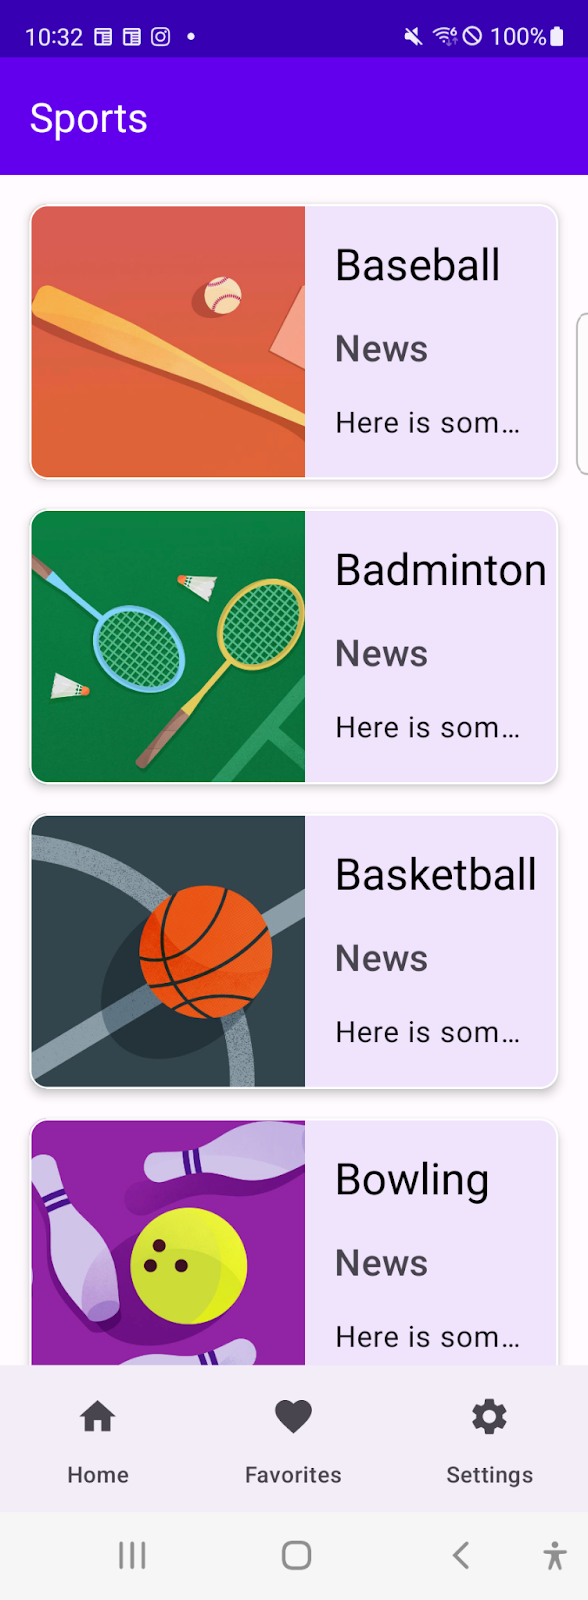 The sports app shows a list of sports  on a compact window with a navigation bar as a top navigation component.